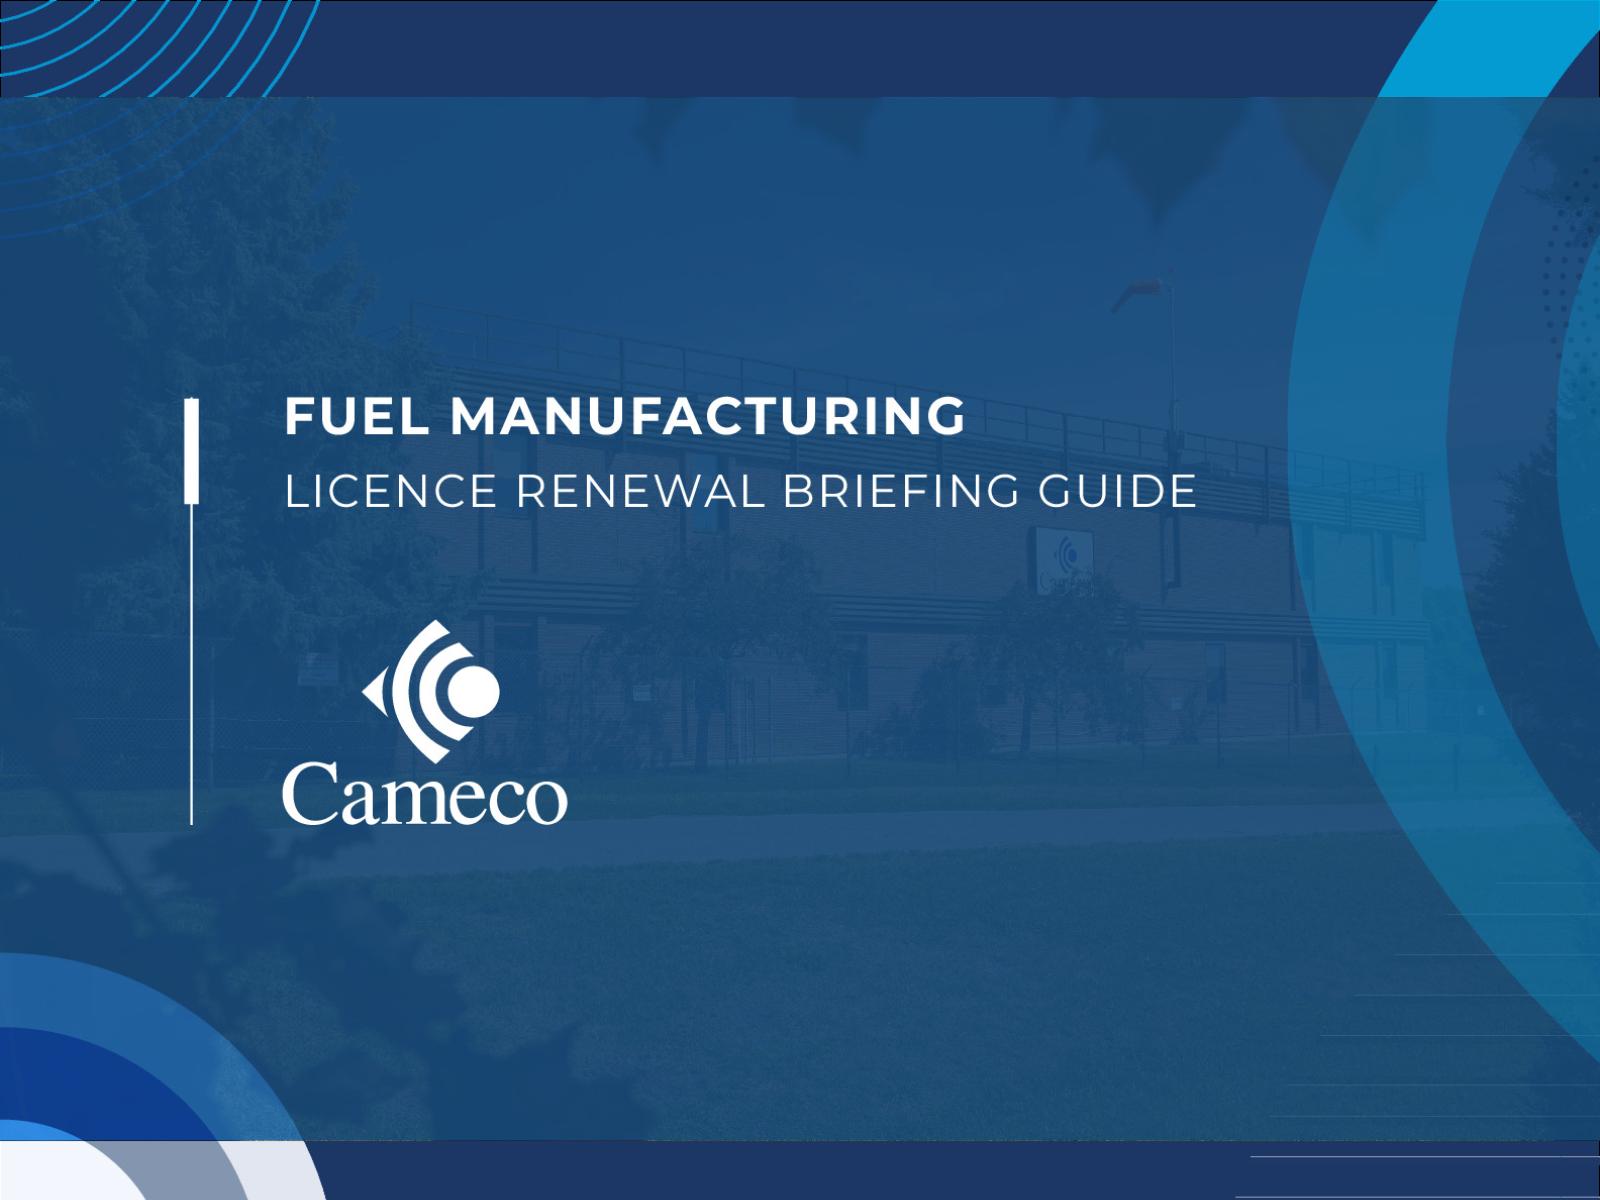 Cameco_Fuel_Manufacturing_Licence_Renewal_-_Briefing_Guide.pdf